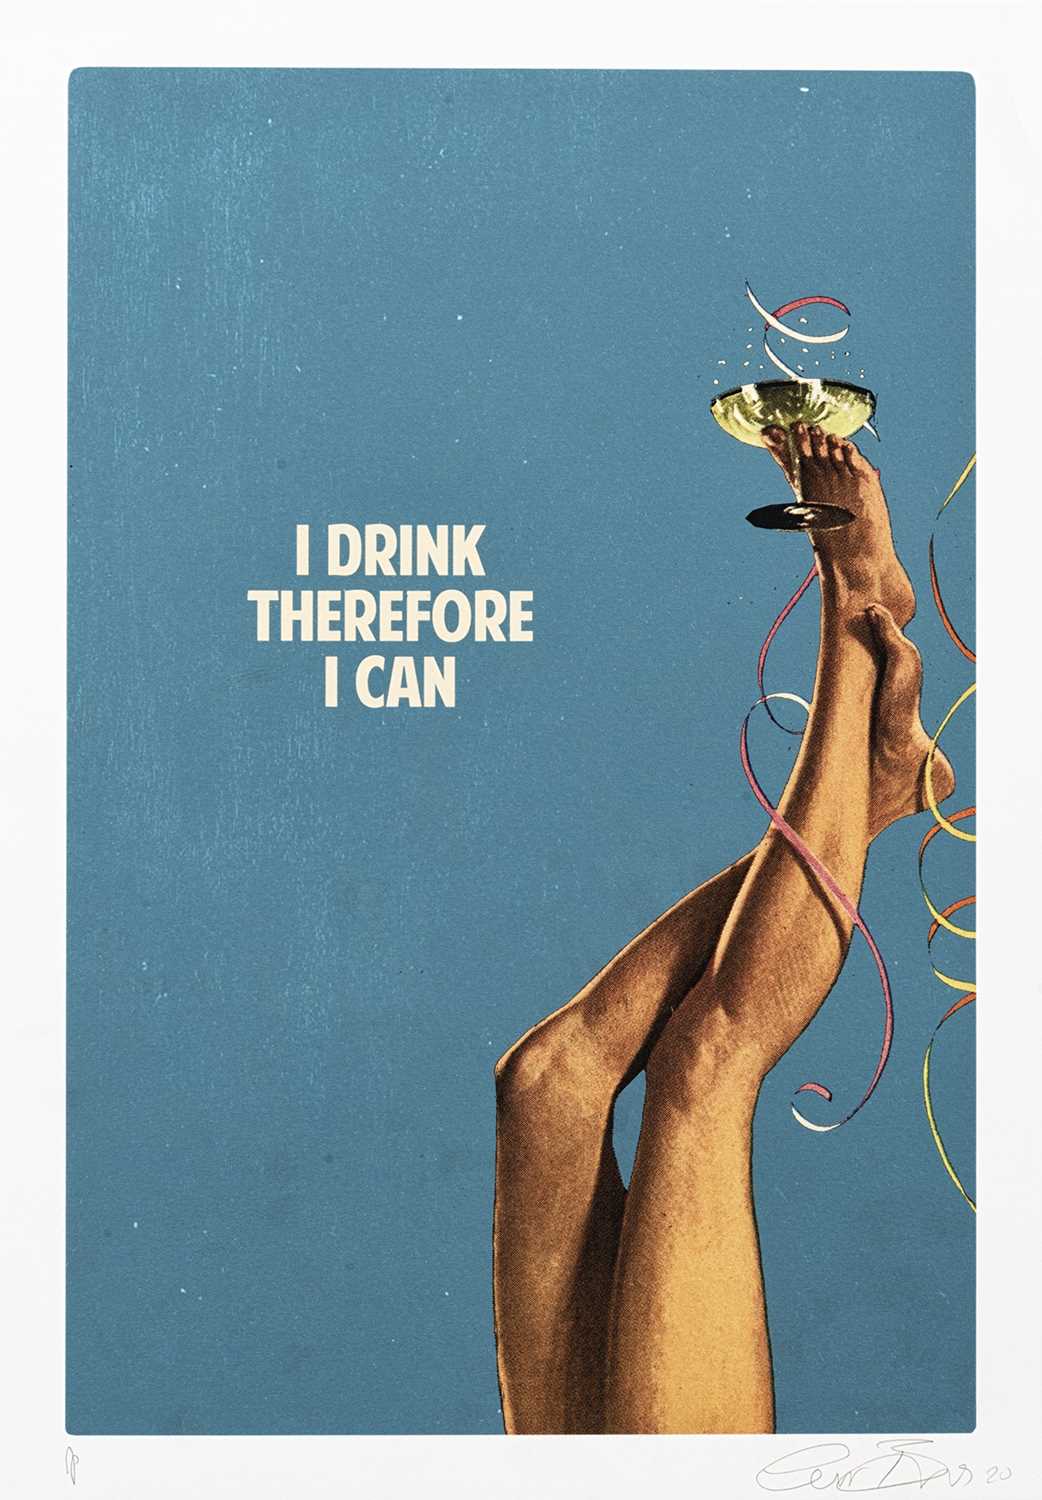 Lot 11 - Connor Brothers (British Duo), 'I Drink Therefore I Can', 2020